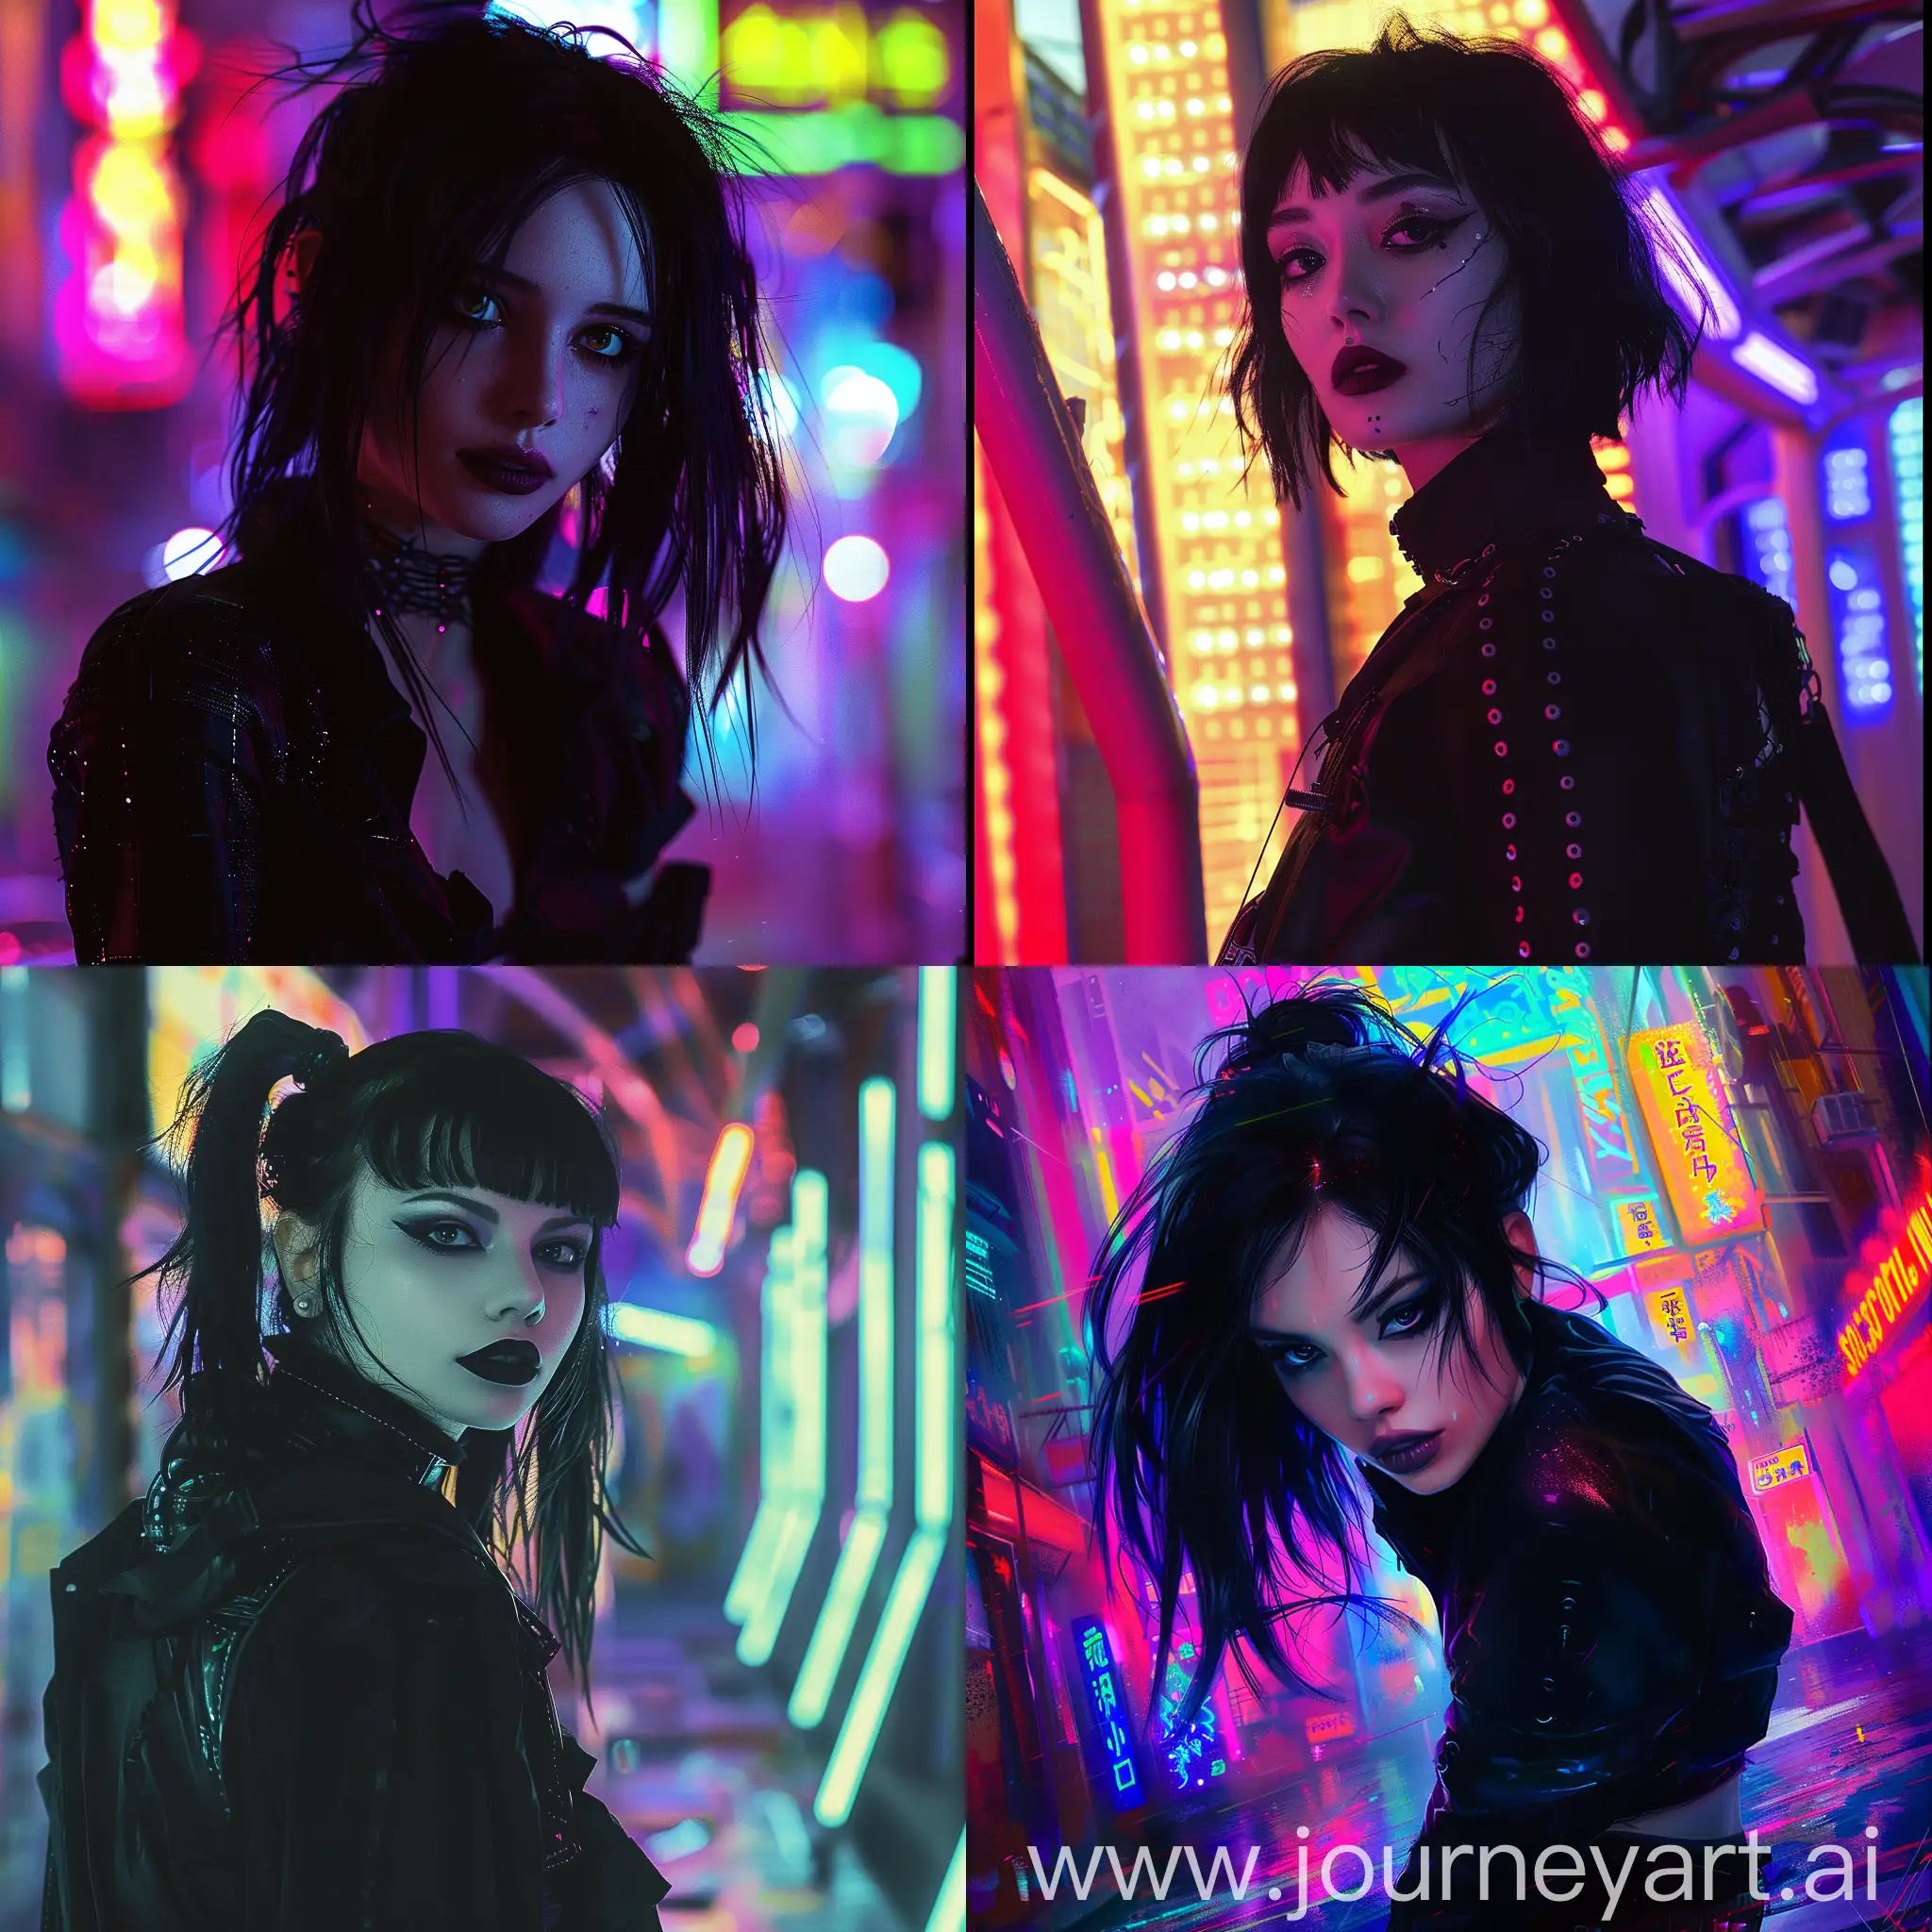 In a dystopian future, a beautiful, smart, and stubborn woman navigates a neon-lit, industrial world. a young woman with black hair in black clothes, dark lipstick and a sly light smile, combining elements of cyberpunk and fantasy. bright, multi-colored background